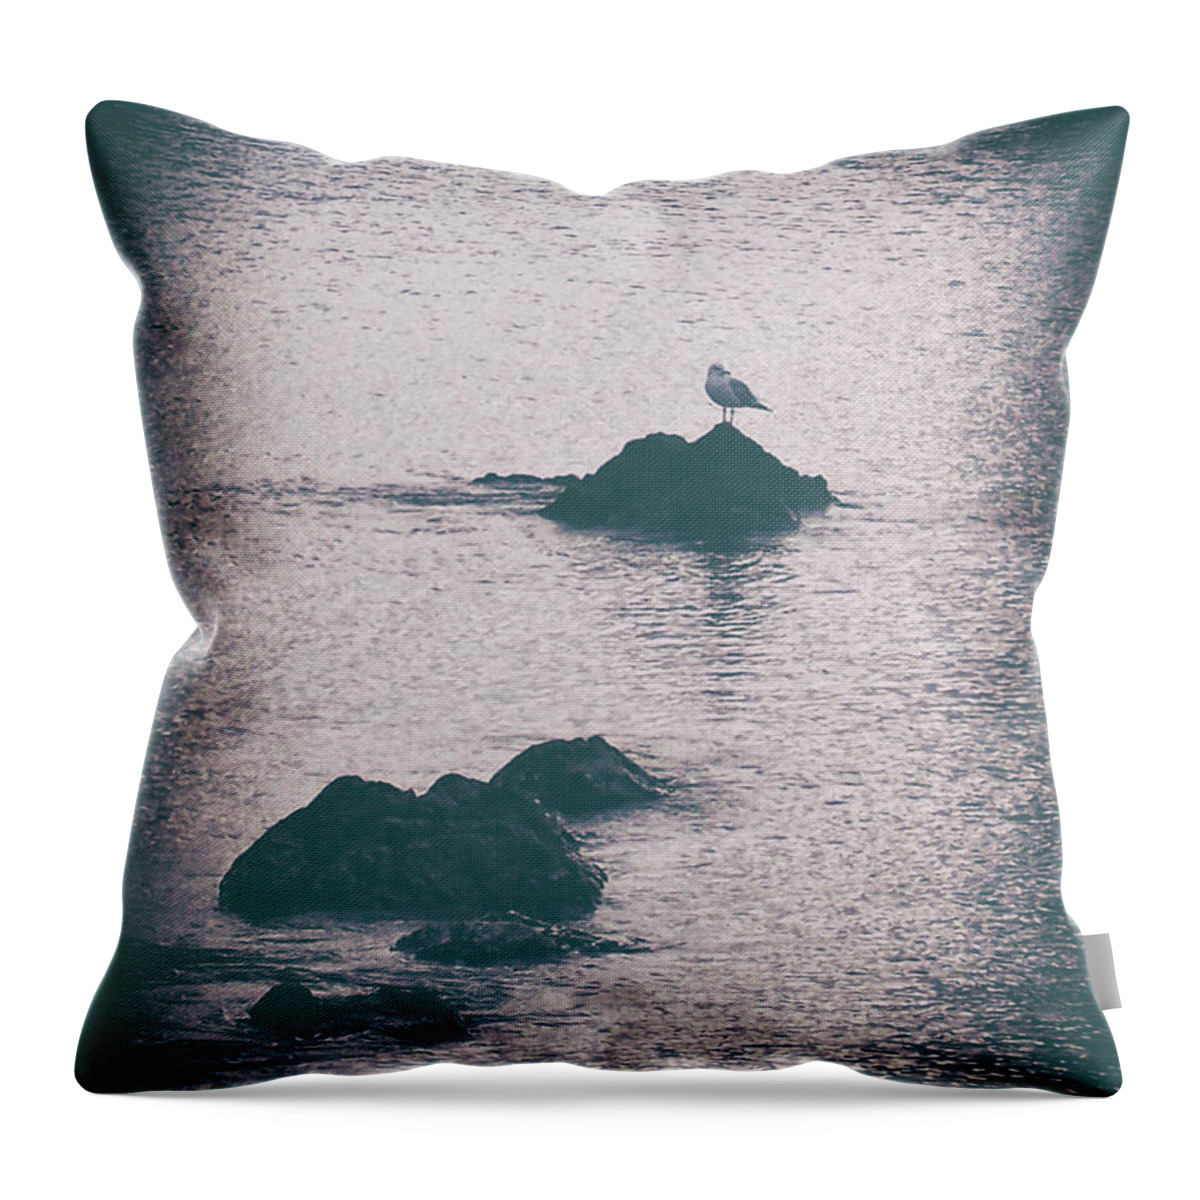 Vintage Throw Pillow featuring the photograph A Seagull Rests by Phil Perkins